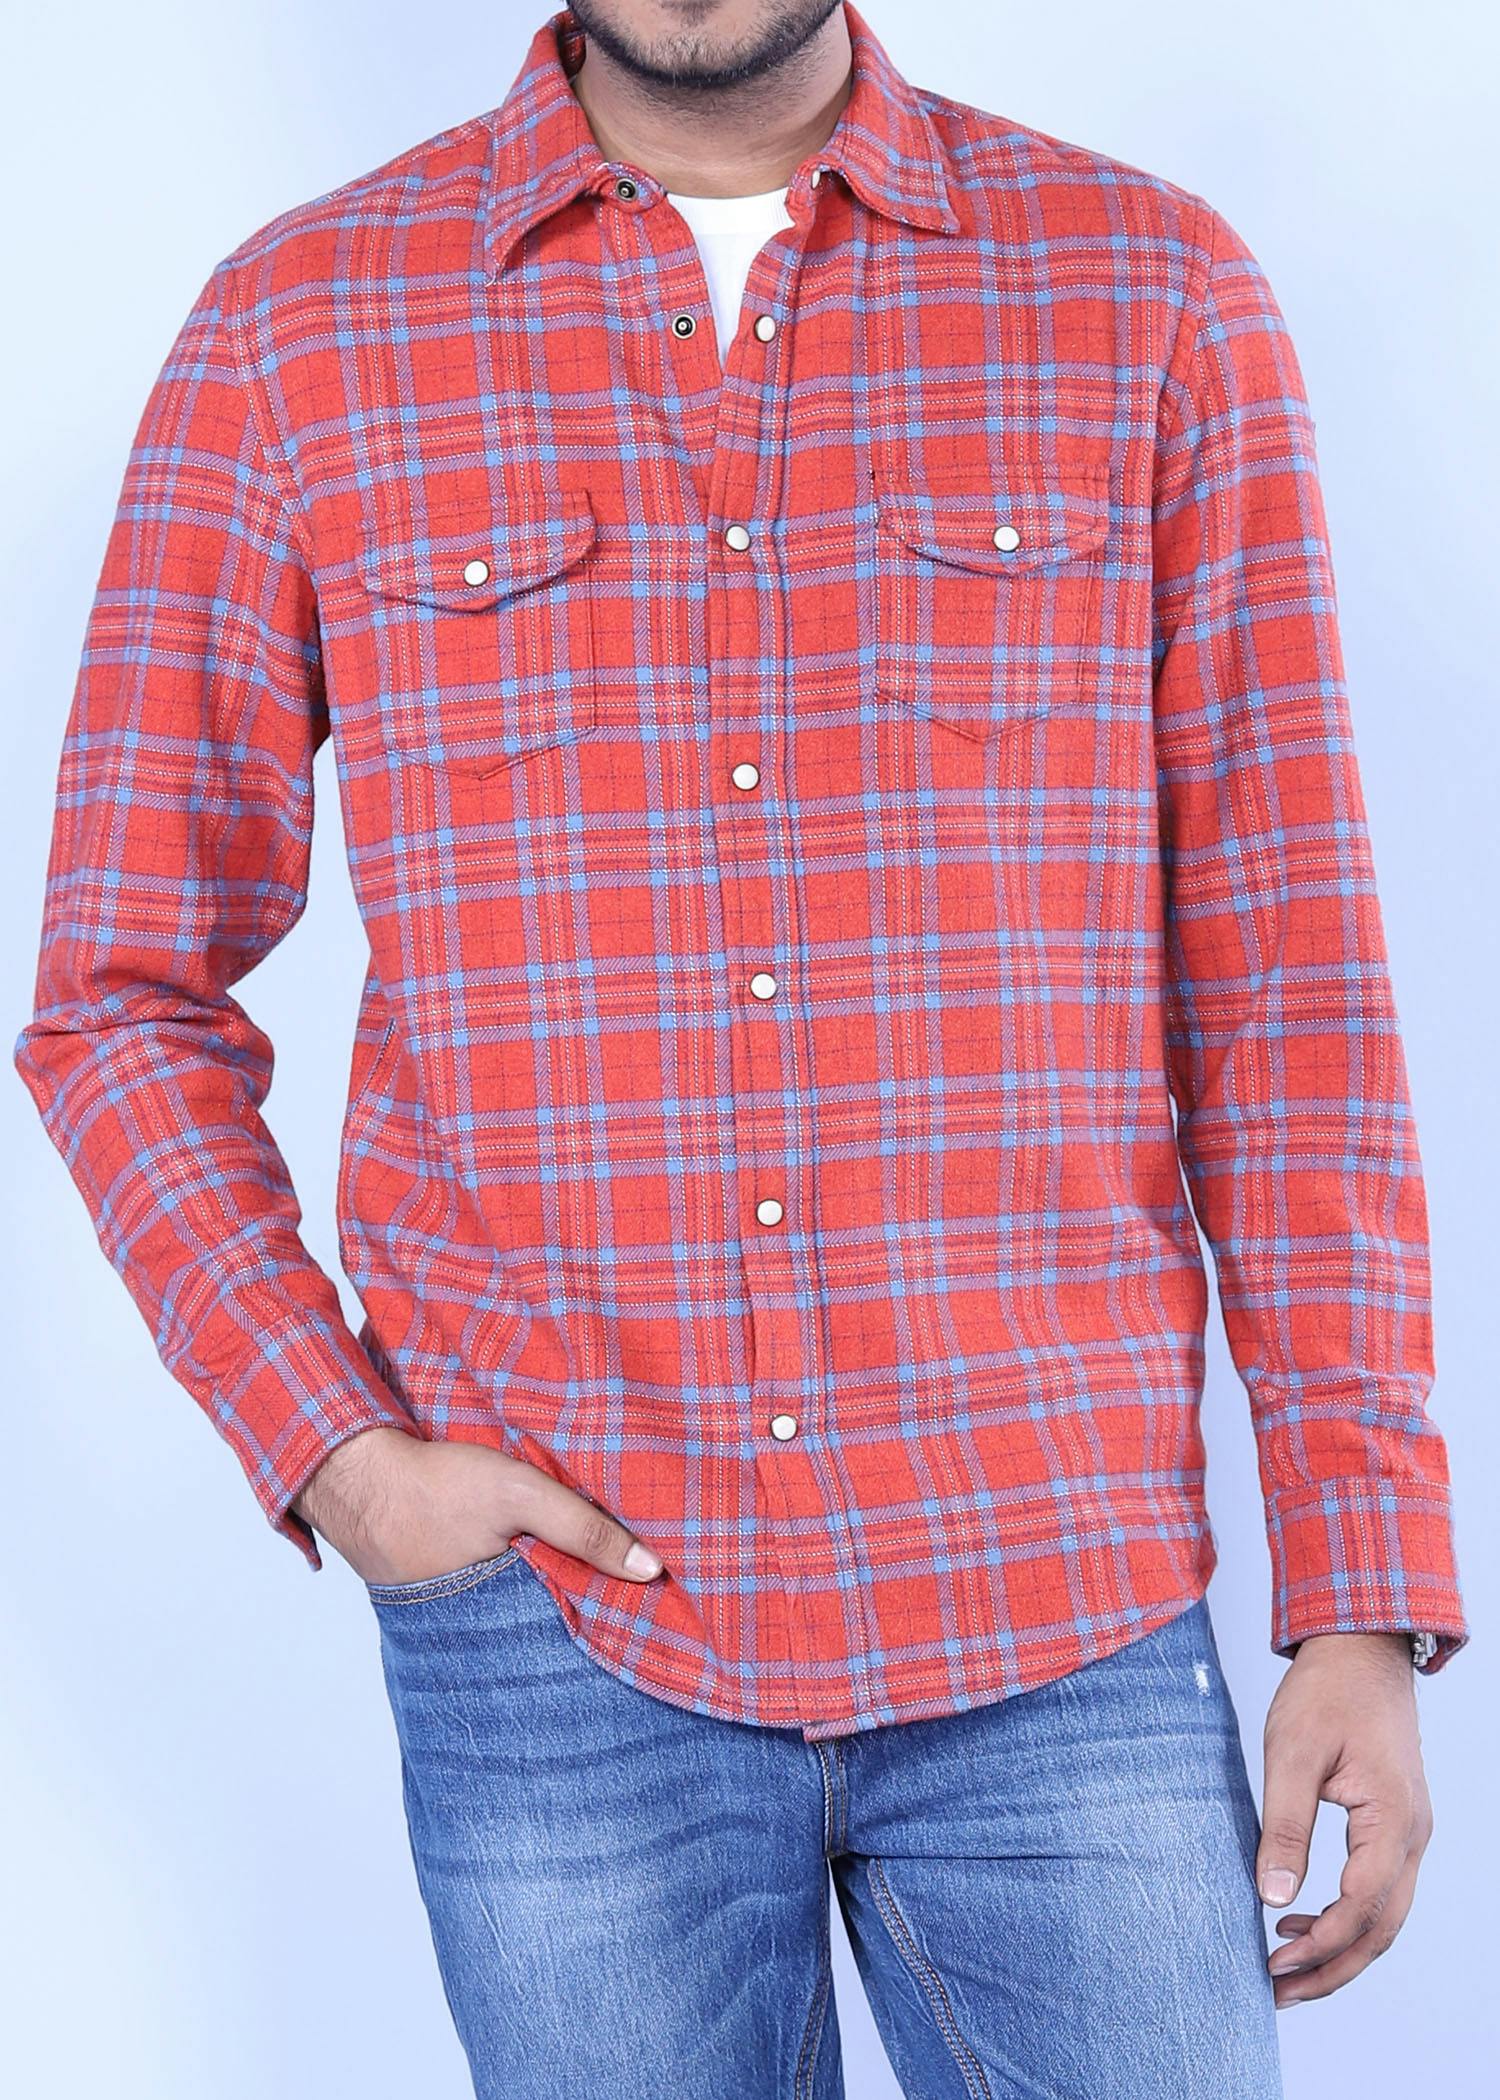 owl flannel shirt red blue color headcropped